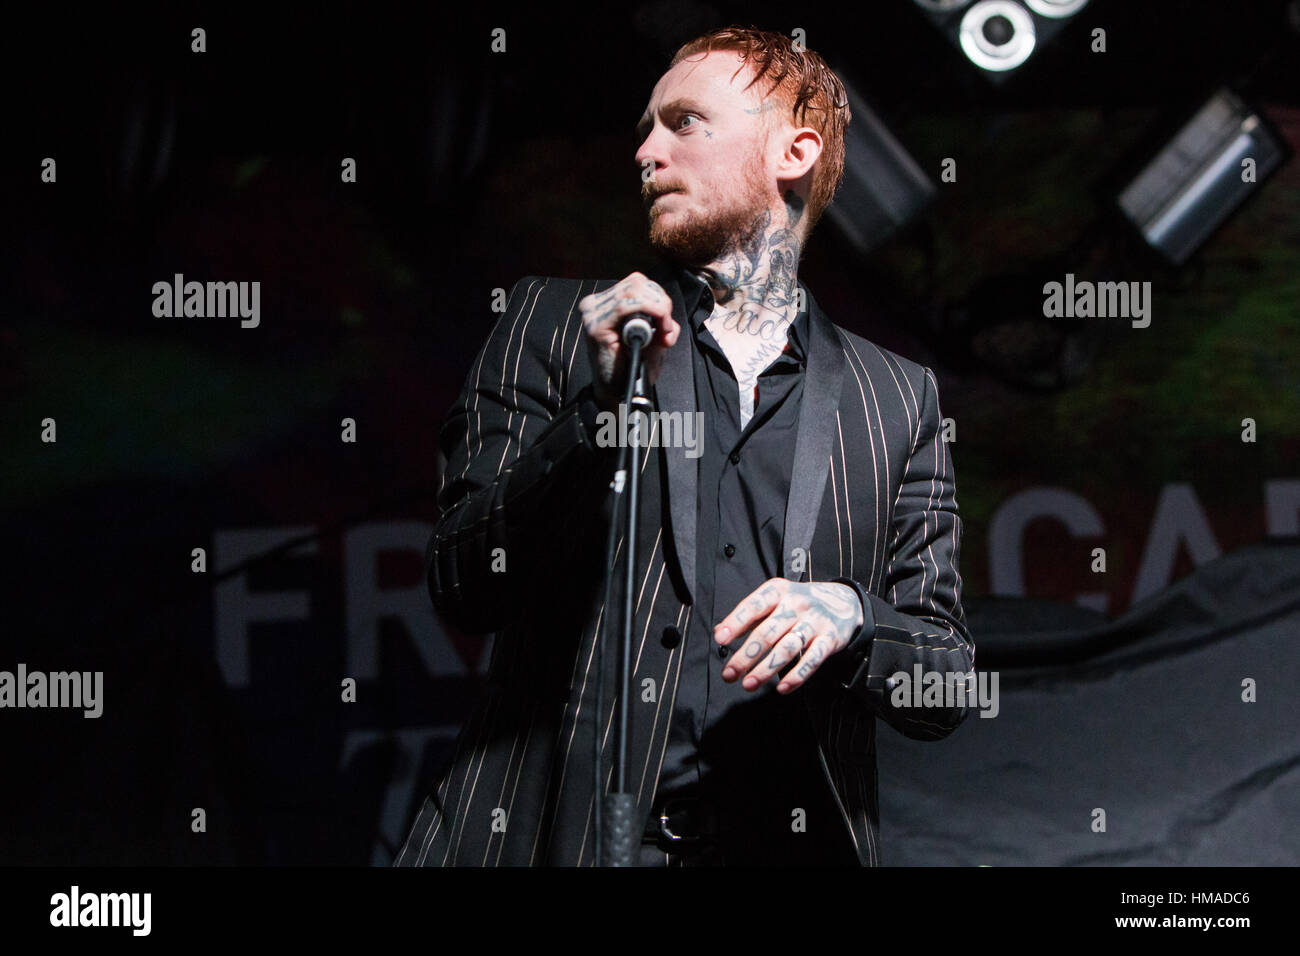 Milan, Italy. 02nd Feb, 2017. The English hardcore punk band Frank Carter and The Rattlesnakesperforms live at Fabrique opening the show of Biffy Clyro Credit: Rodolfo Sassano/Alamy Live News Stock Photo